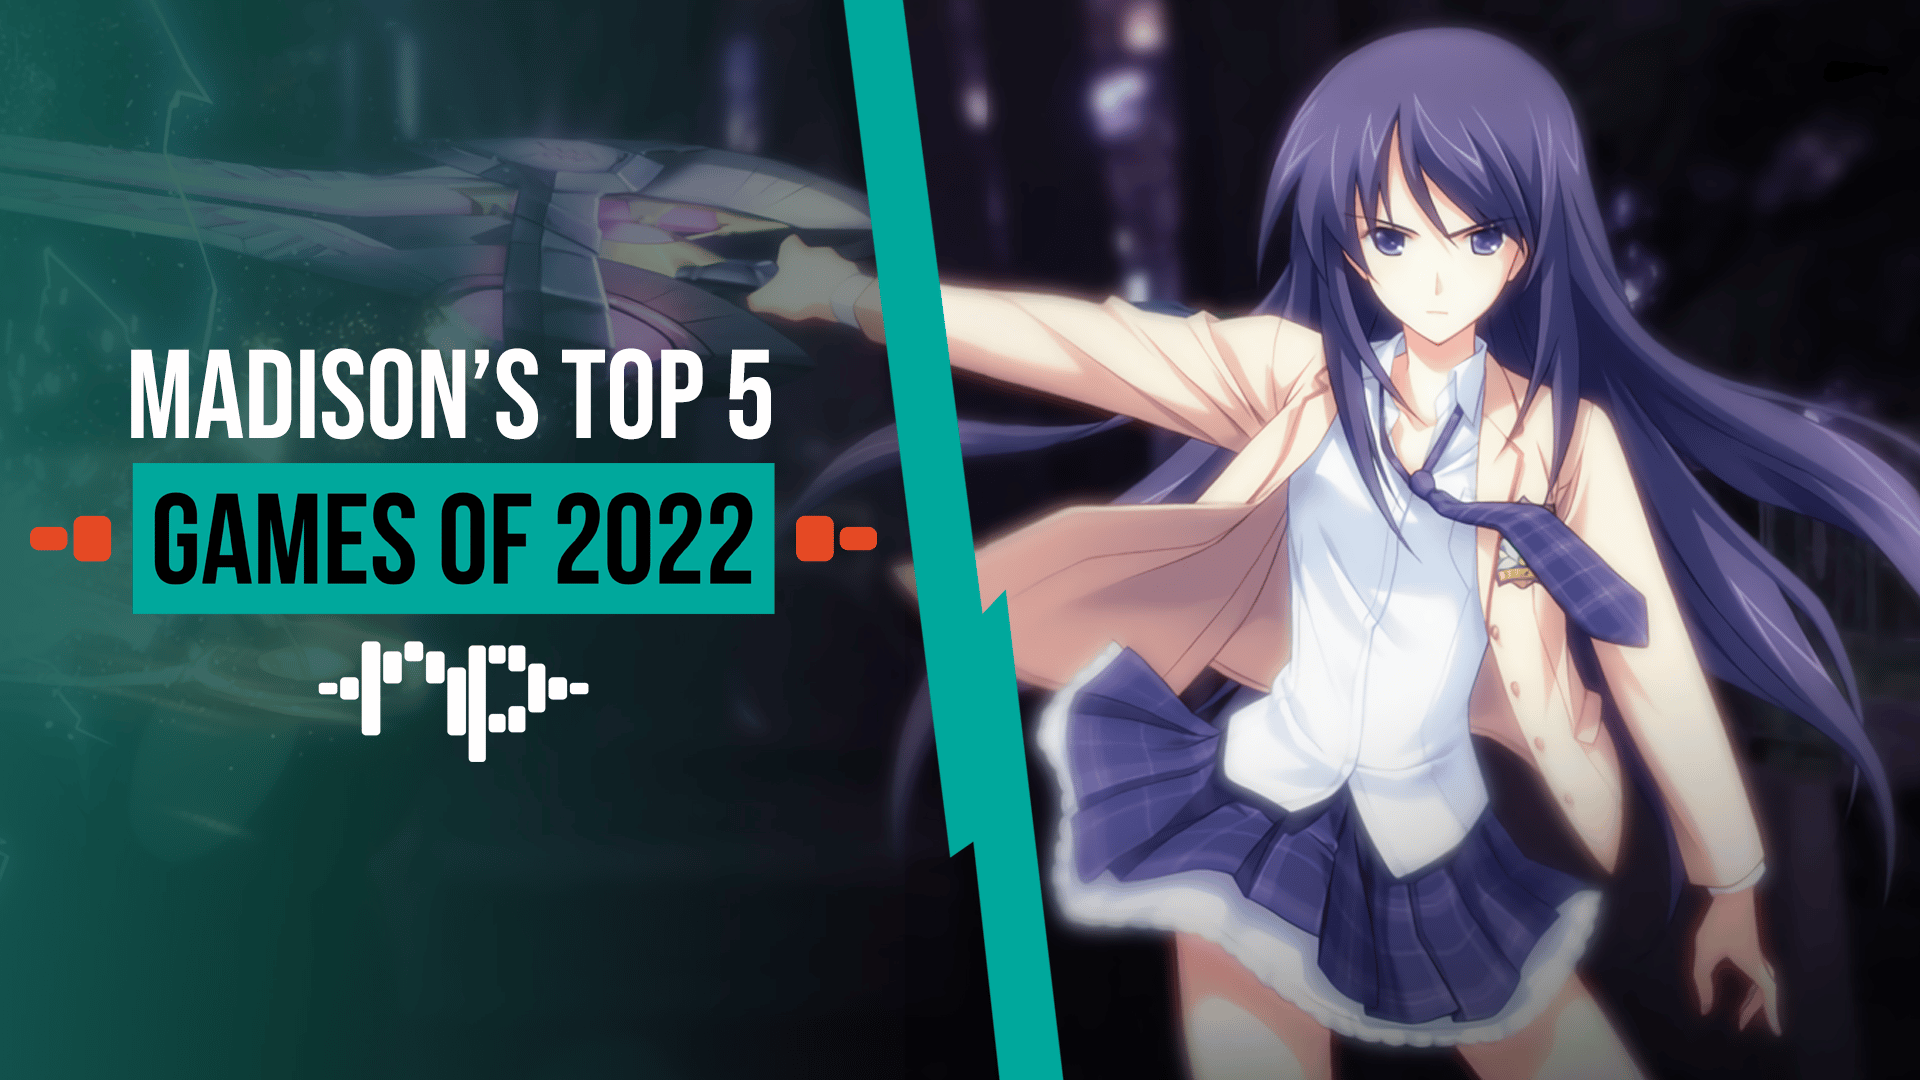 Best Games of 2022: Madison’s Top 5 Games of 2022